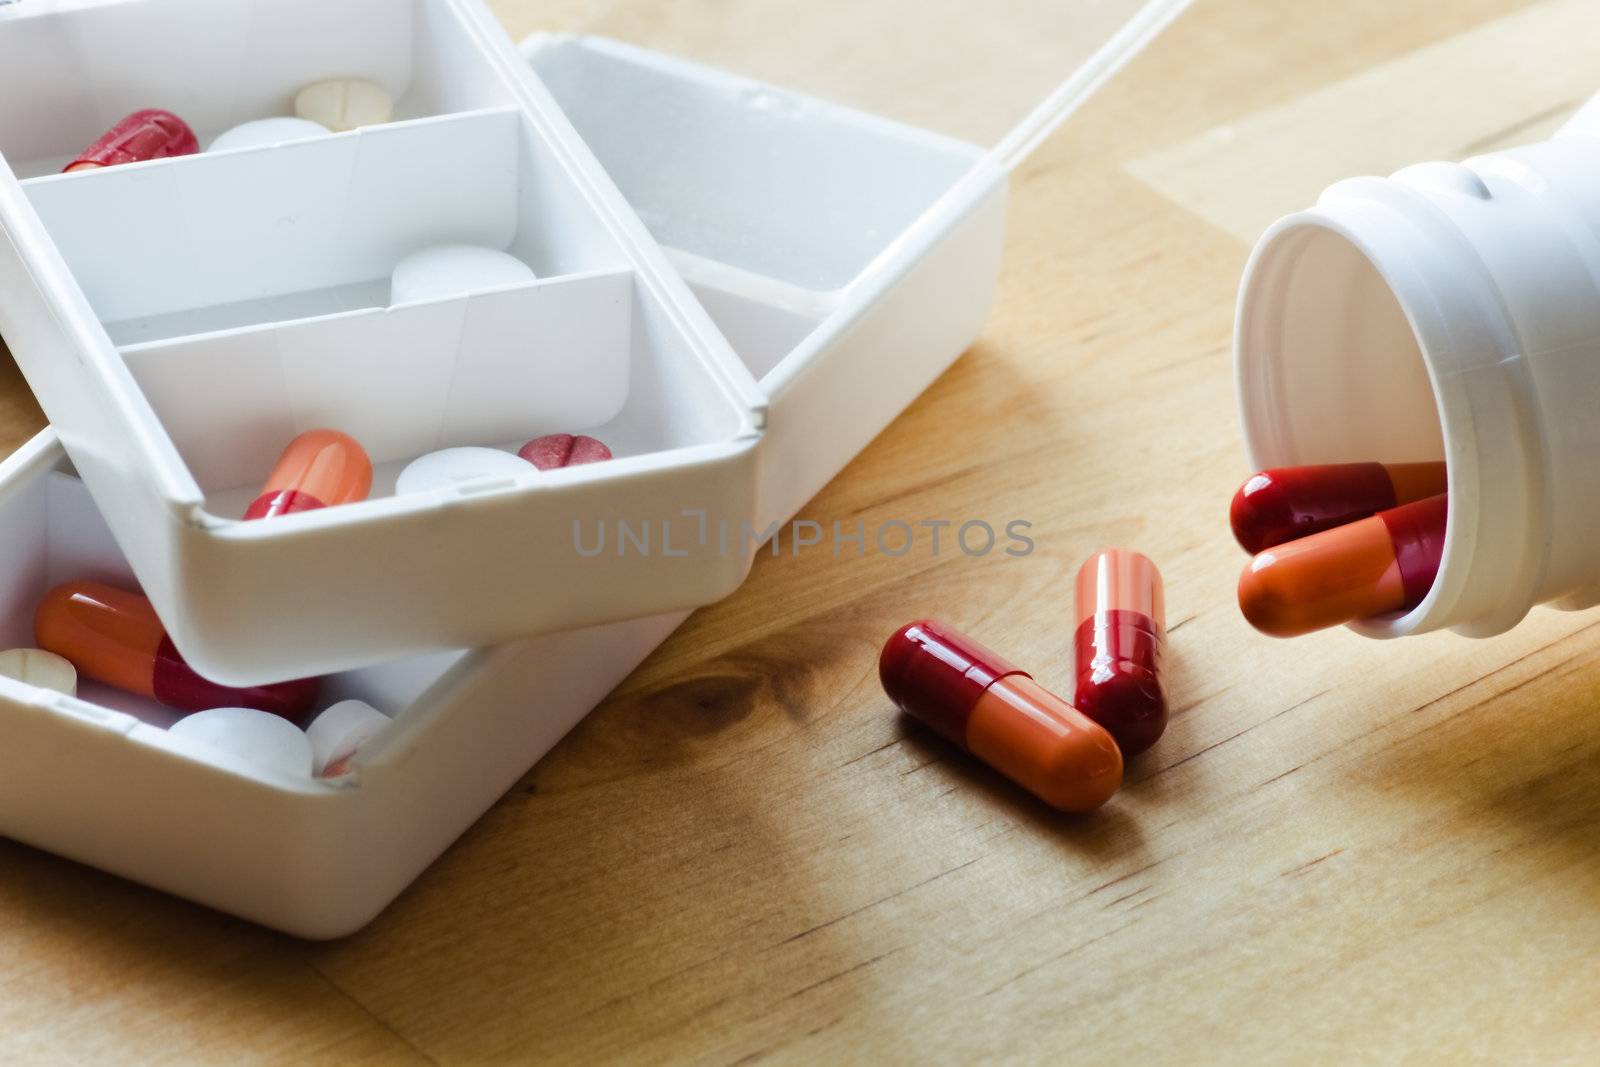 Pills, capsules and tablets sorted in medicine box for use as daily medication